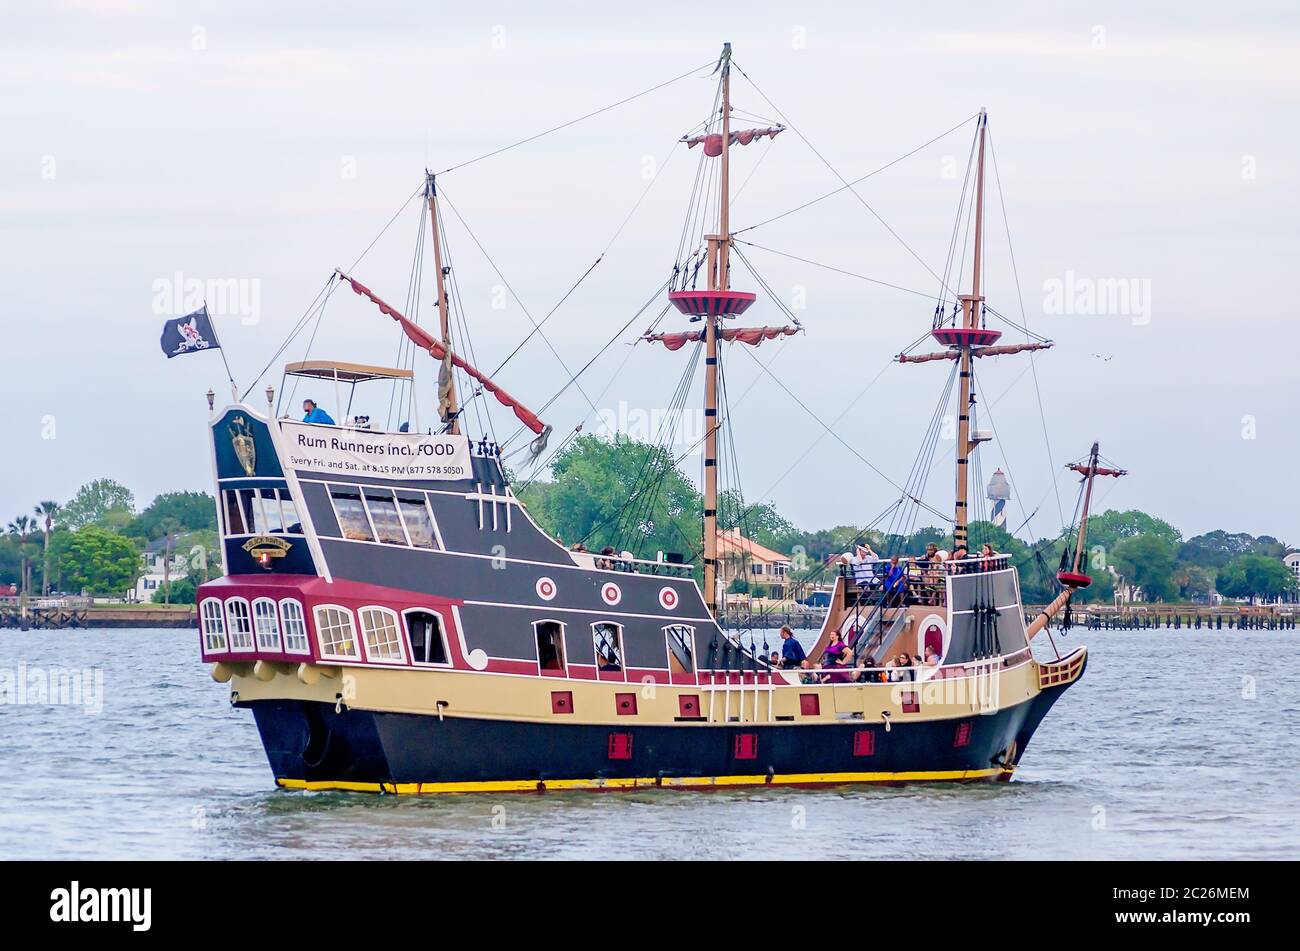 The Black Raven pirate ship takes tourists on a rum runners cruise in the Matanzas River, April 10, 2015, in St. Augustine, Florida. Stock Photo